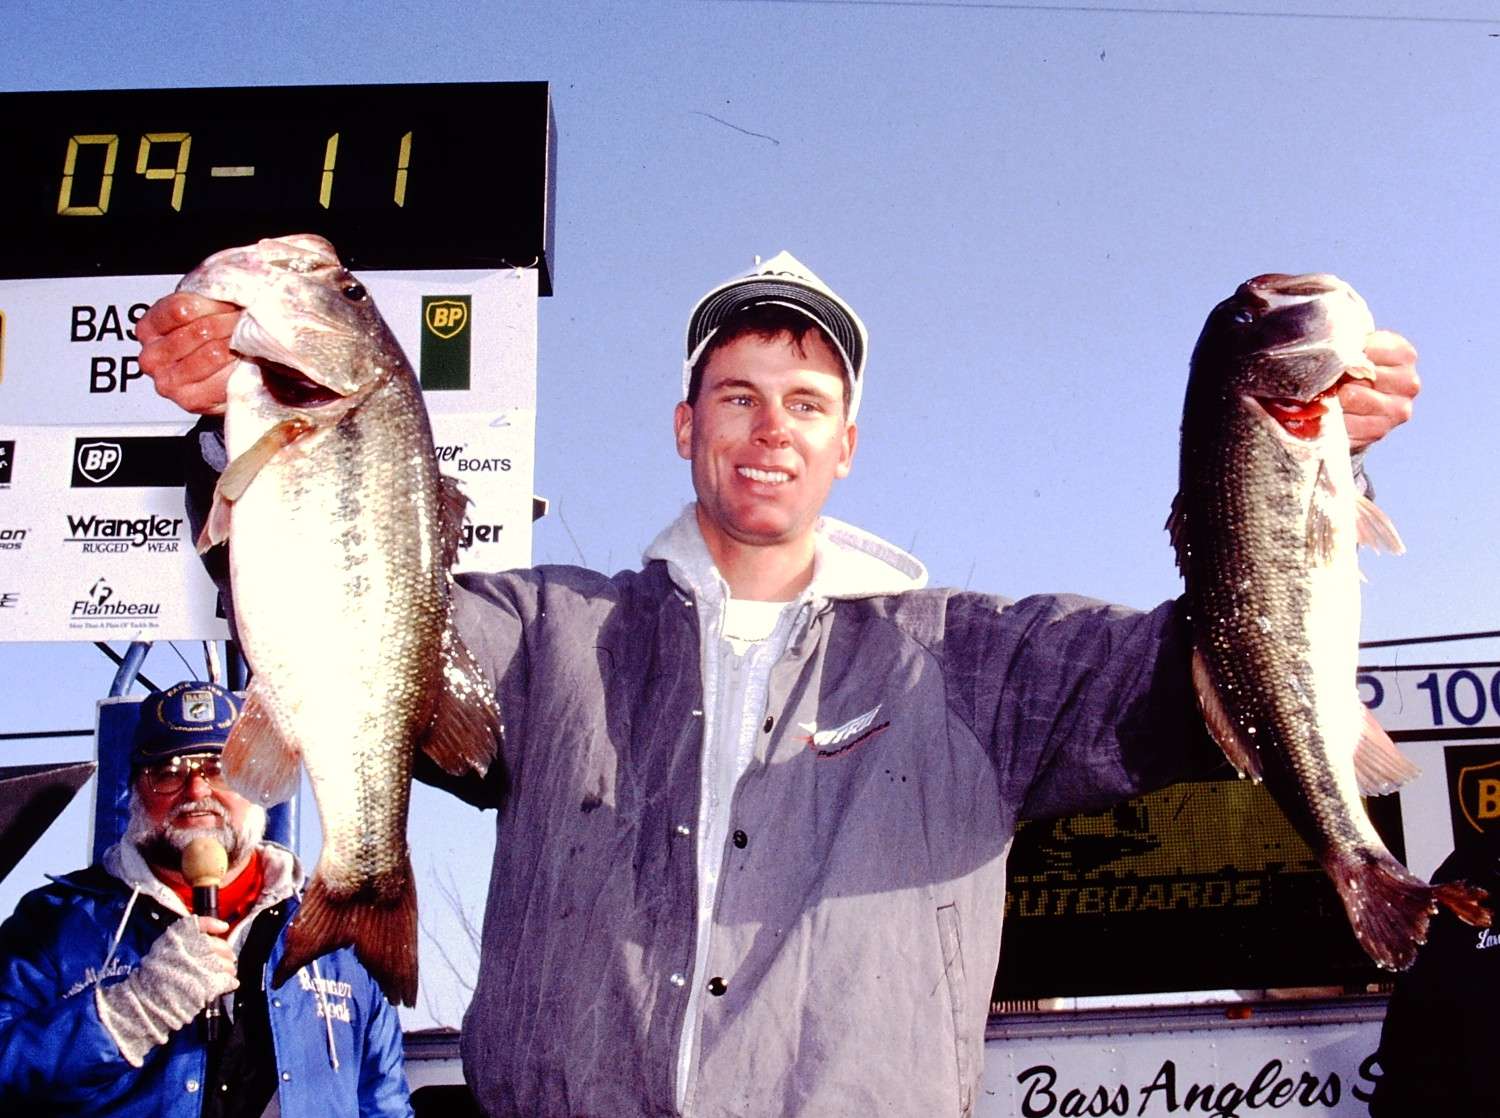 Youngest Angler of the Year: Kevin VanDam, 24
Kevin VanDam started winning Toyota Bassmaster Angler of the Year awards almost as soon as he started fishing professionally. In 1992, VanDam only had a few tournaments under his belt when he bested the entire field of pros. He walked away with his first AOY title at age 24, and he's won six more since then.